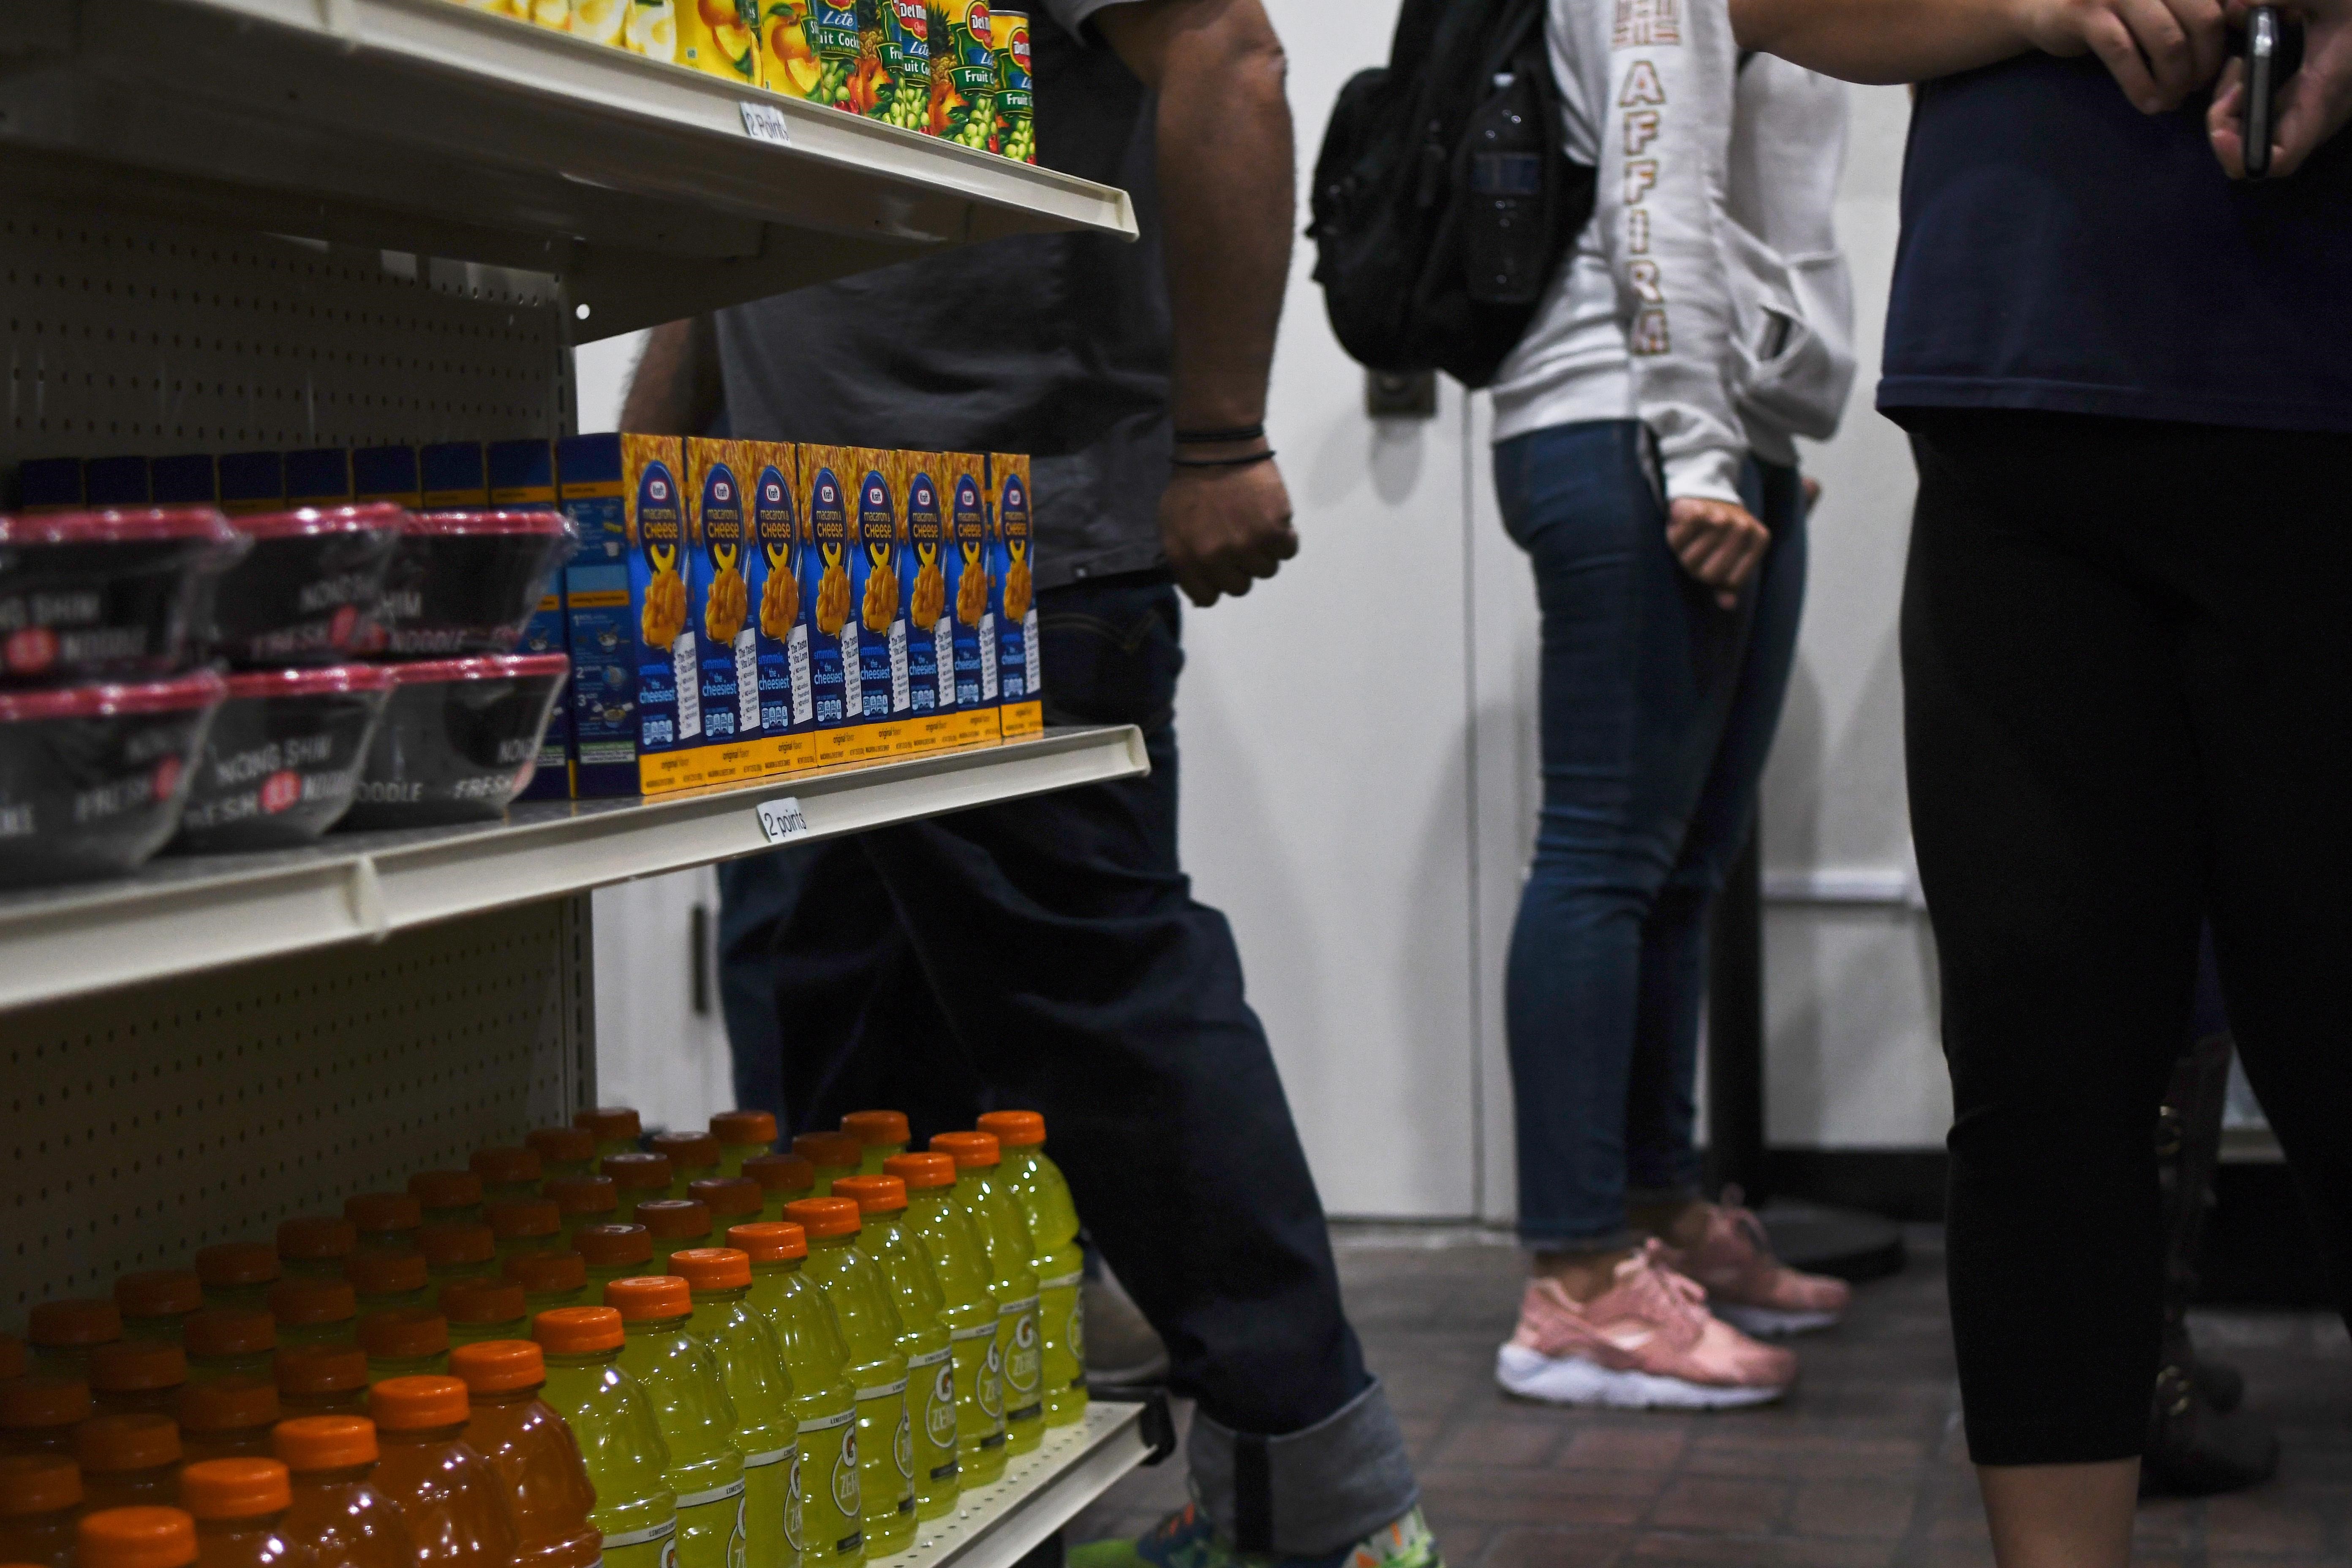 San Joaquin Delta College's new food pantry relies on a points system, giving students access to healthy and nutritious perishable and non-perishable foods.